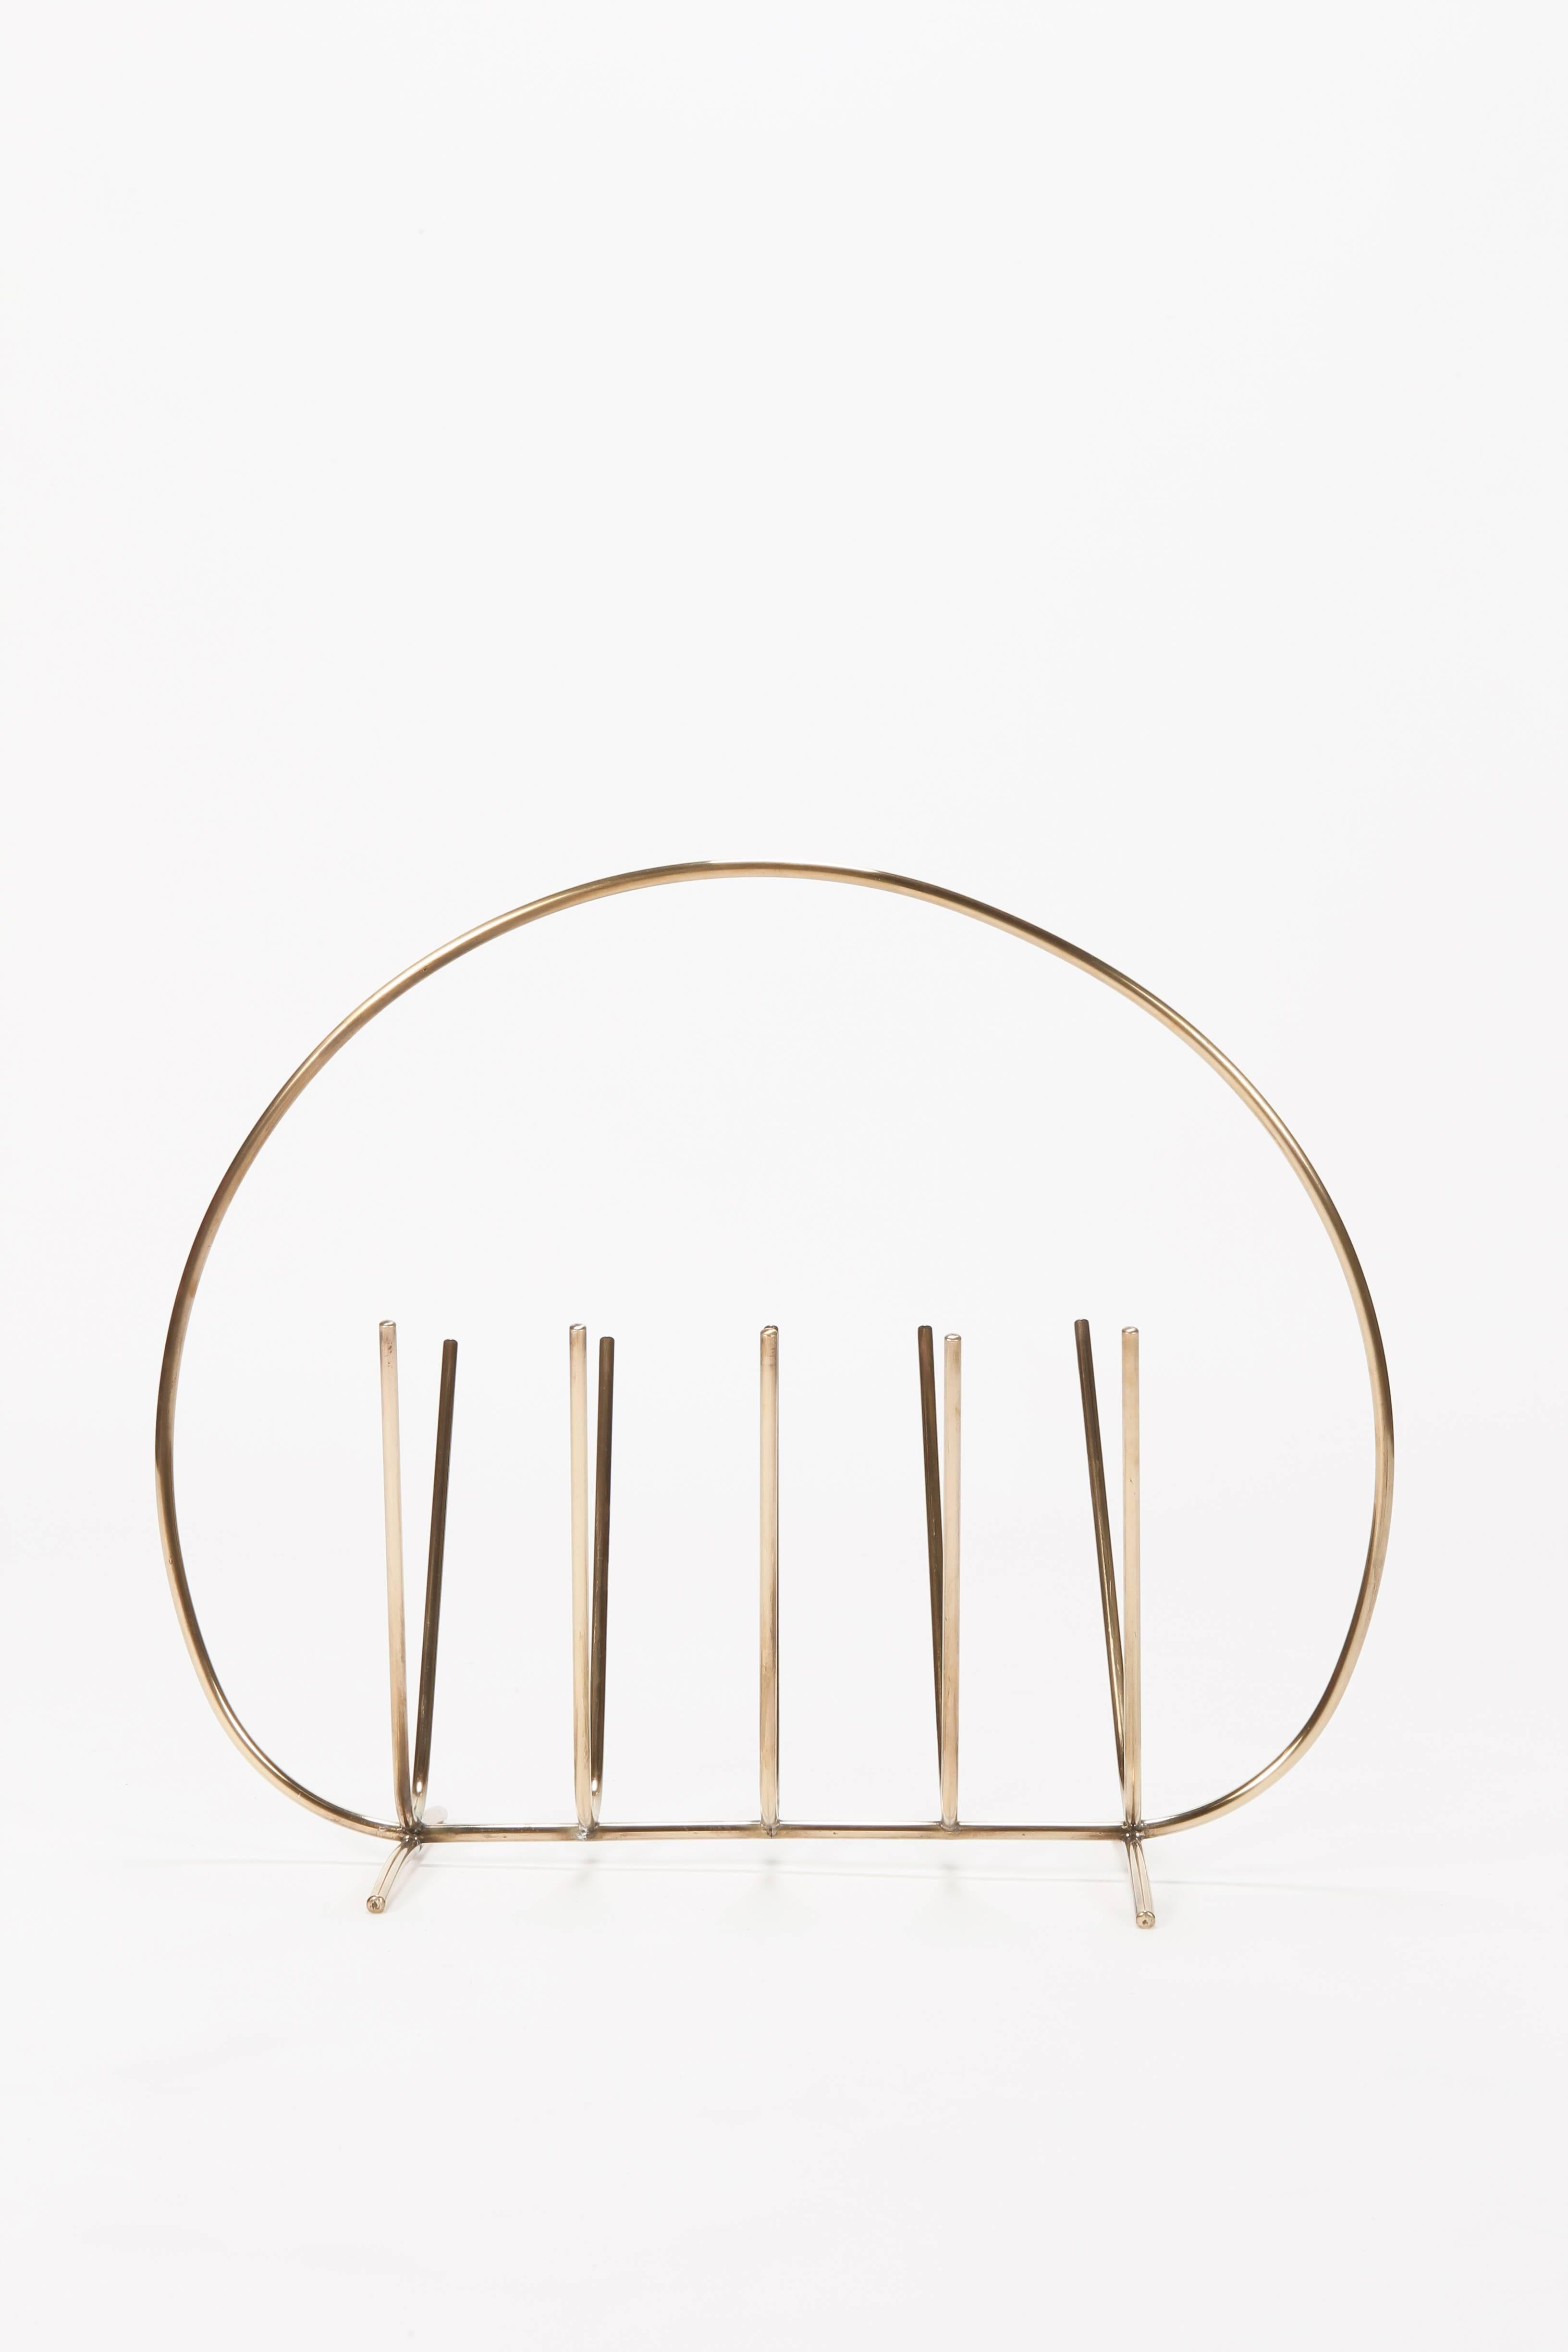 Austrian solid brass magazine rack manufactured in the 1950s.